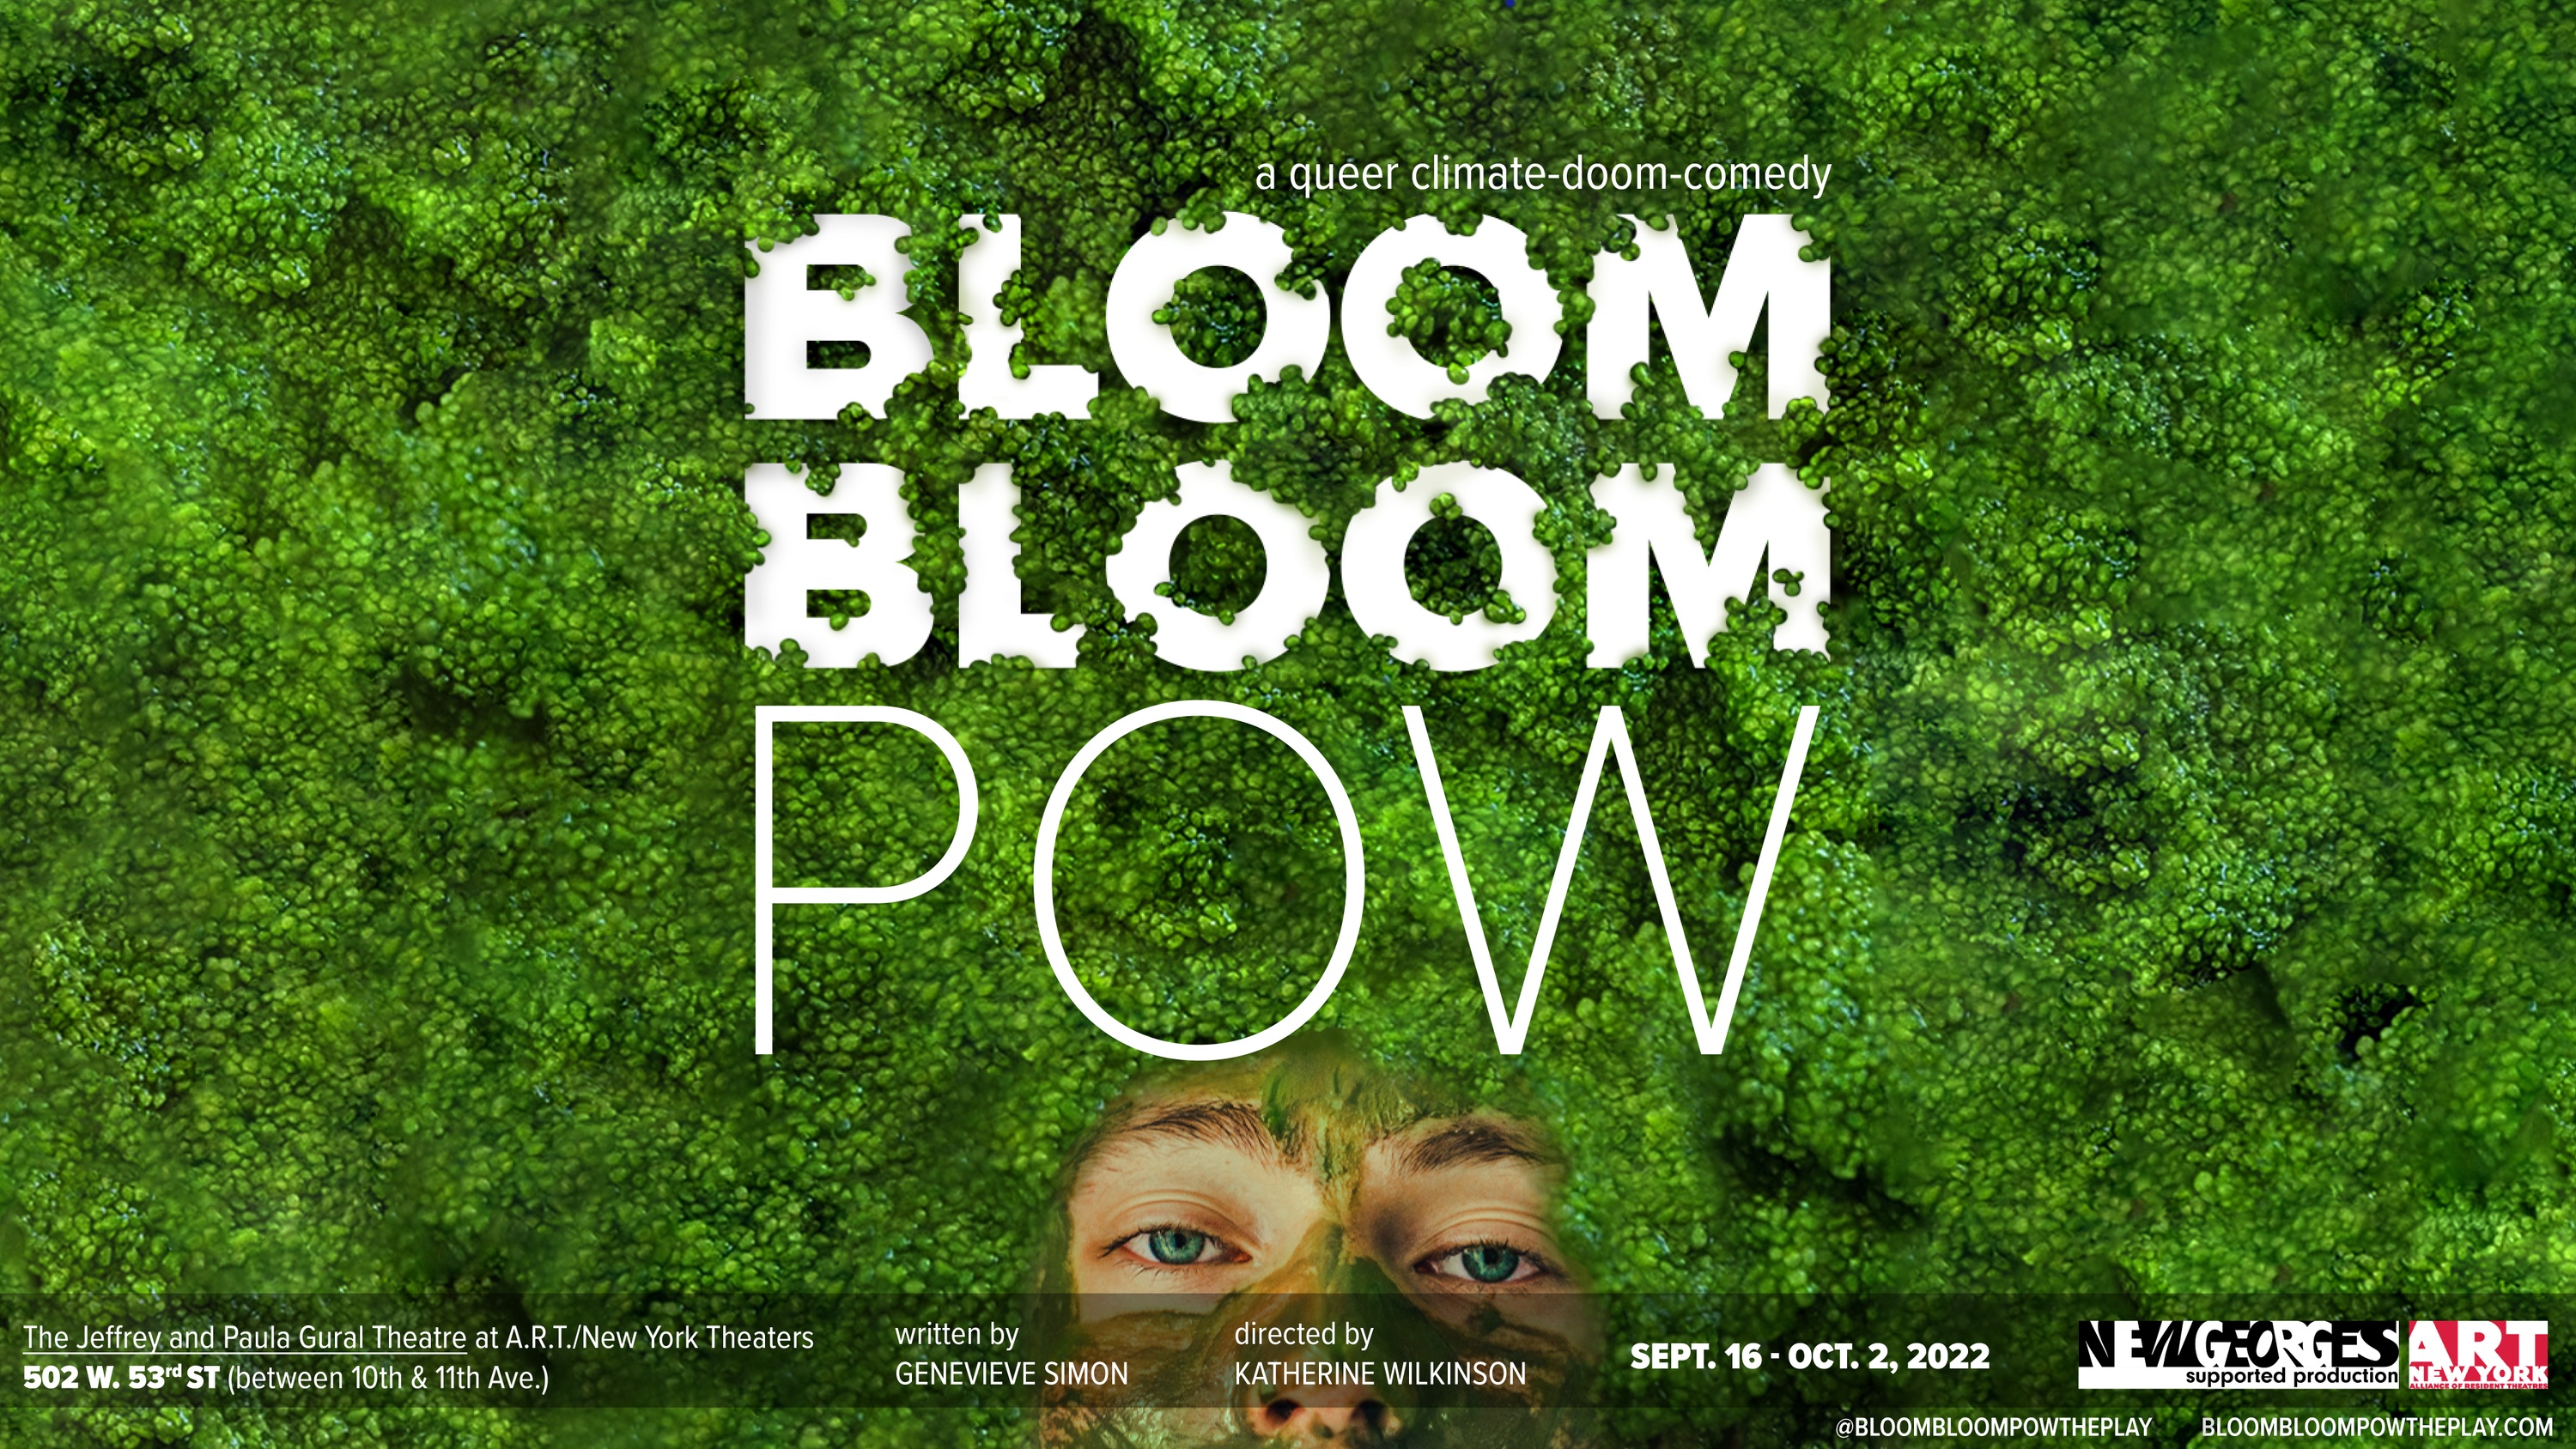 Logo for Bloom Bloom Pow. Moss covers the frame. In the lower half of the image, blue eyes and a nose peek out from the moss. The person's forehead is covered with algae. In the center of the image are the words Bloom Bloom Pow in white font. In subscript are the words "A queer climate doom comedy."